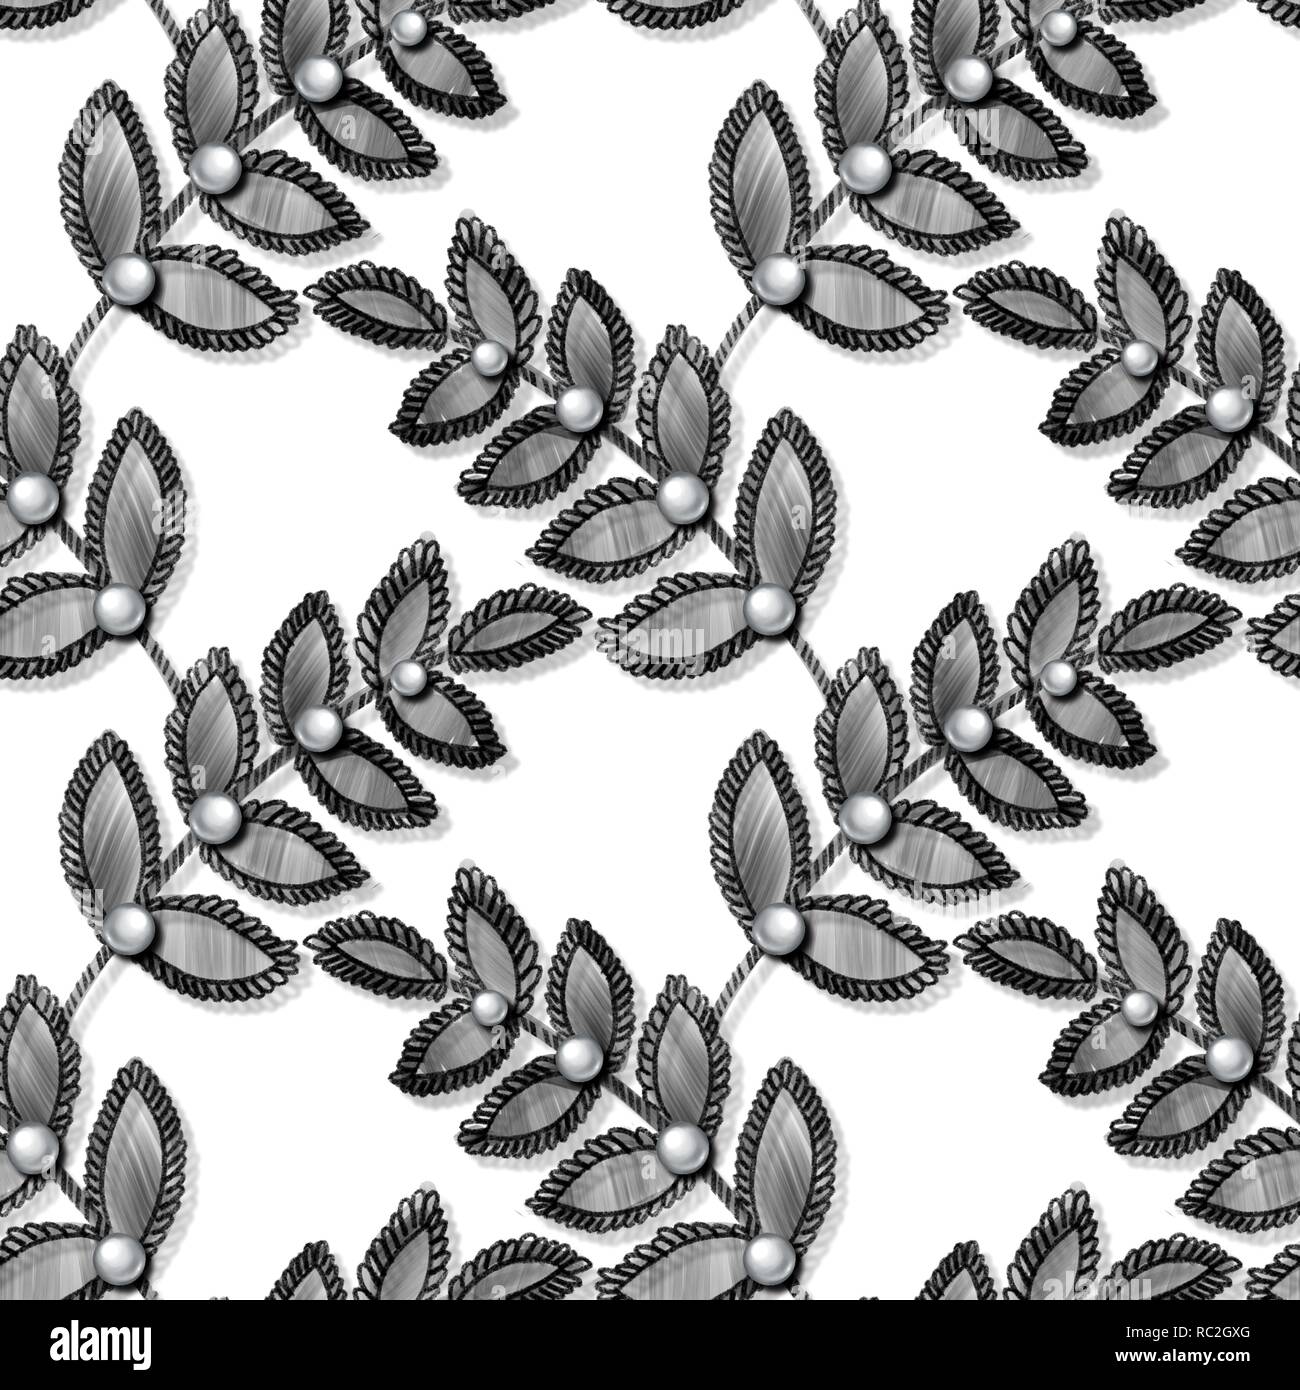 Lace seamless pattern with decortive leaves and pearls Stock Photo